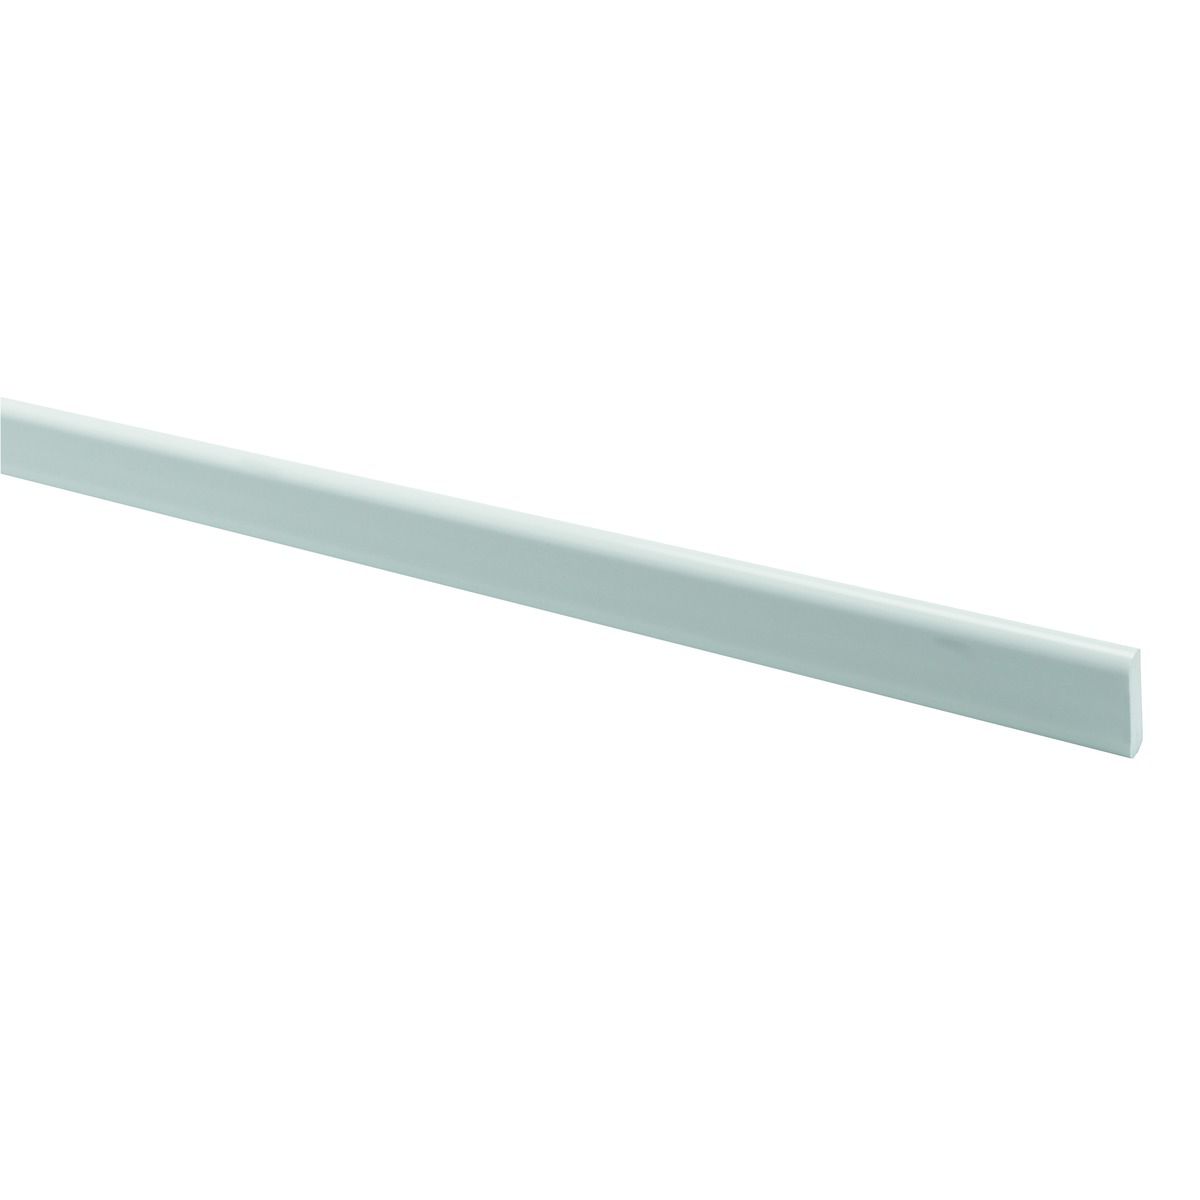 Image of Wickes PVCu White Cloaking Profile 45 x 2500mm